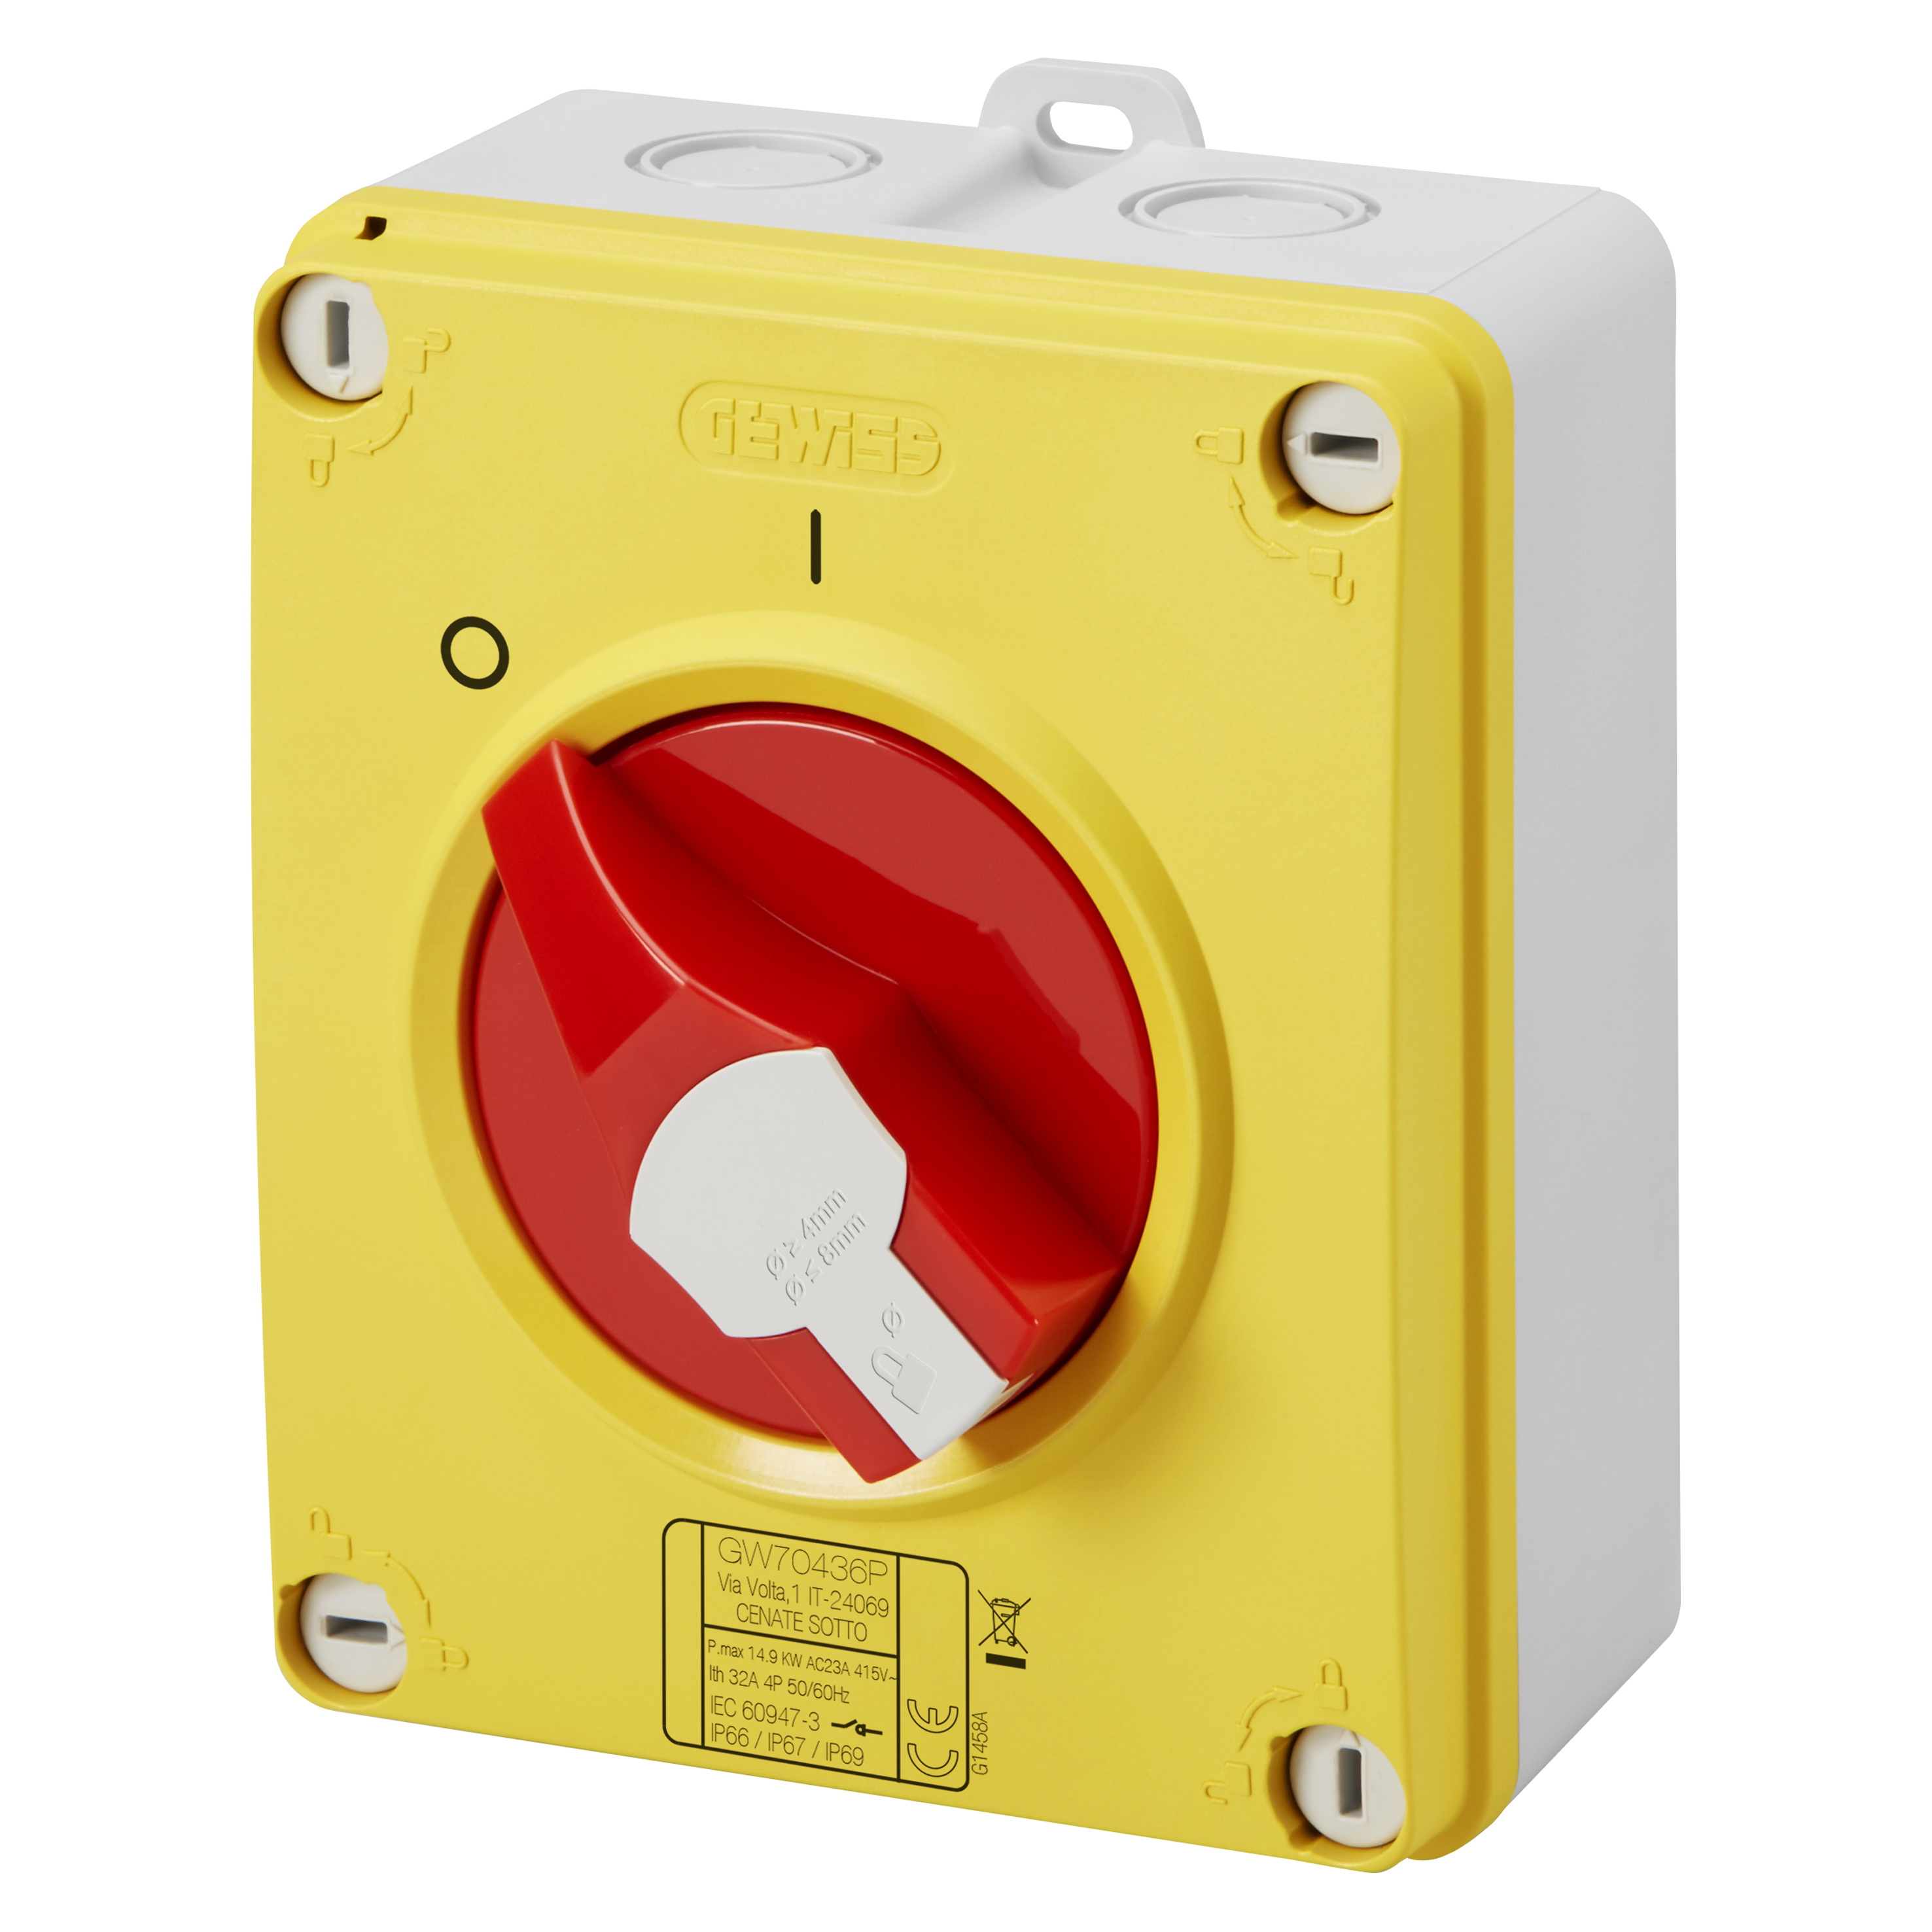 GW70436P Isolator - HP - Emergency - Isolating Material Box - 32A 4P - Lockable Red Knob - IP66/67/69